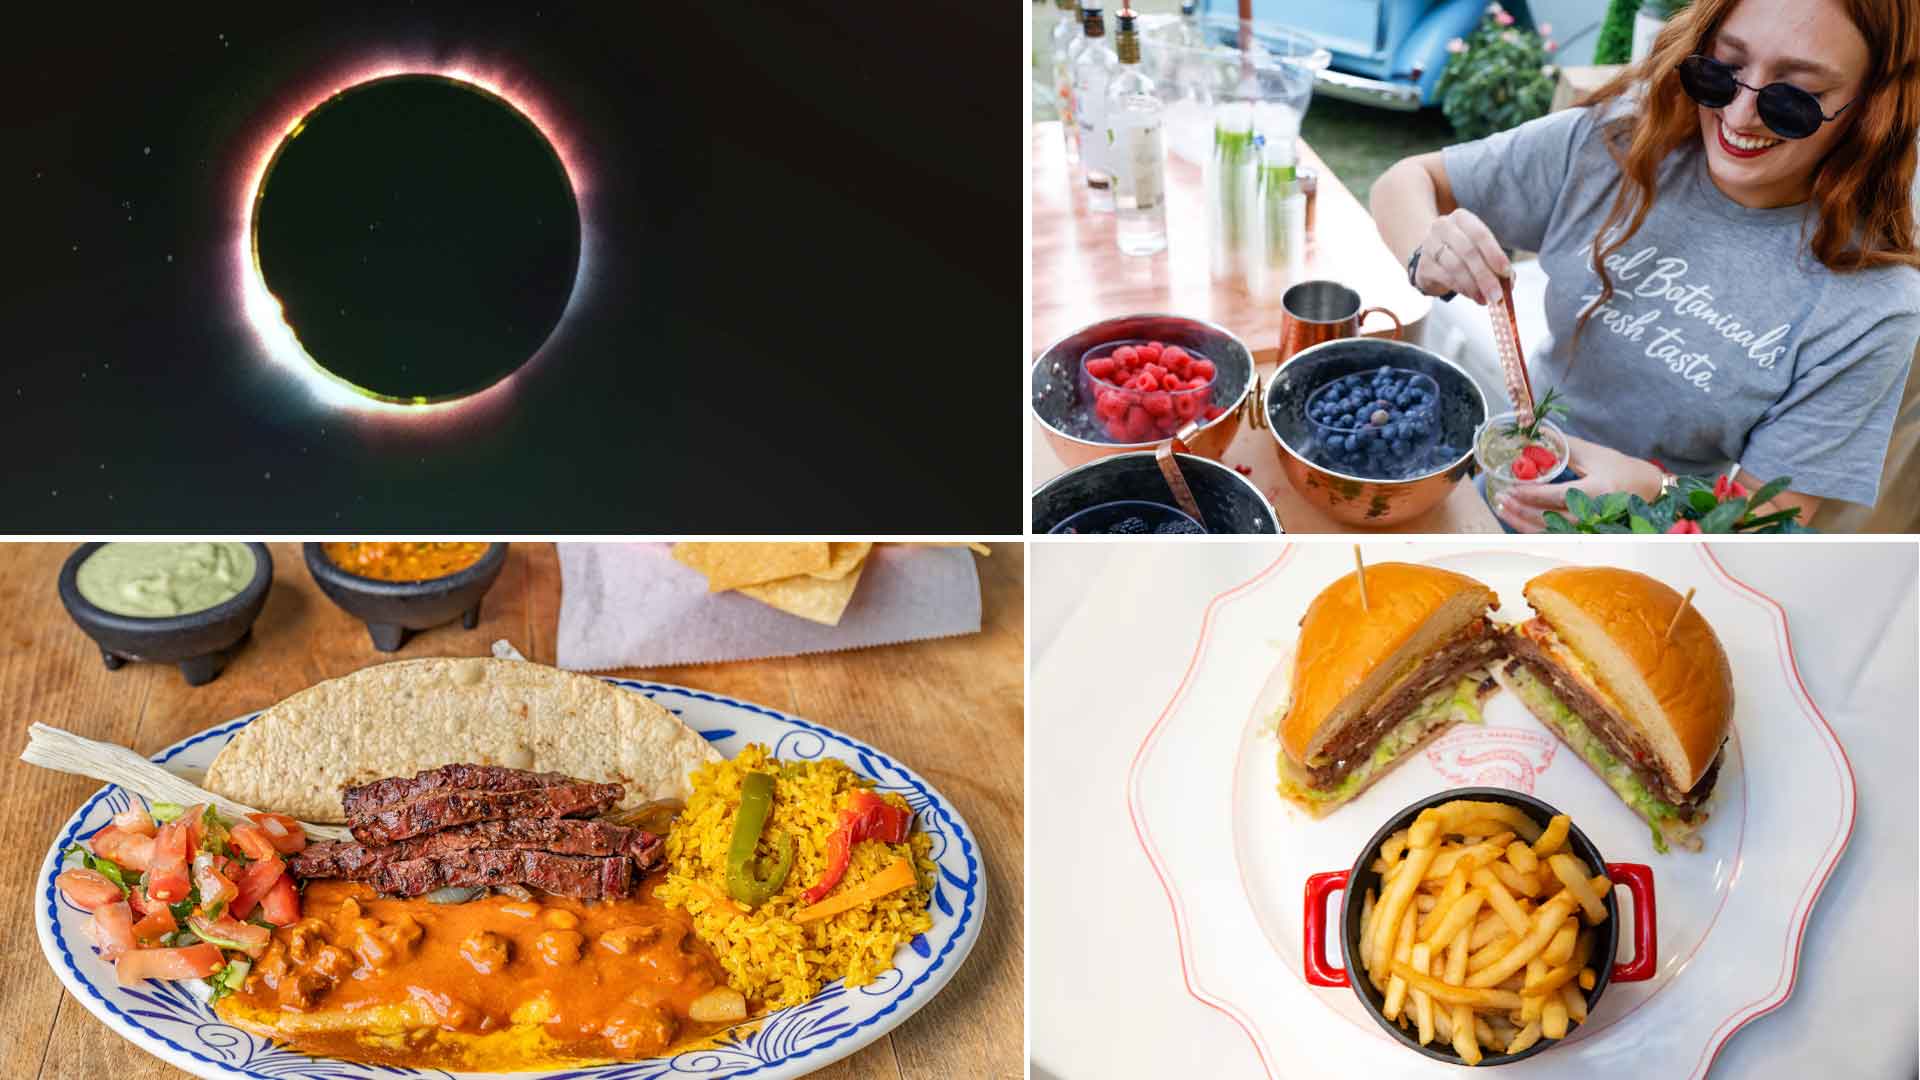 Foodie 411: Eclipse options, Fort Worth Food + Wine Festival and El
Tiempo's new location